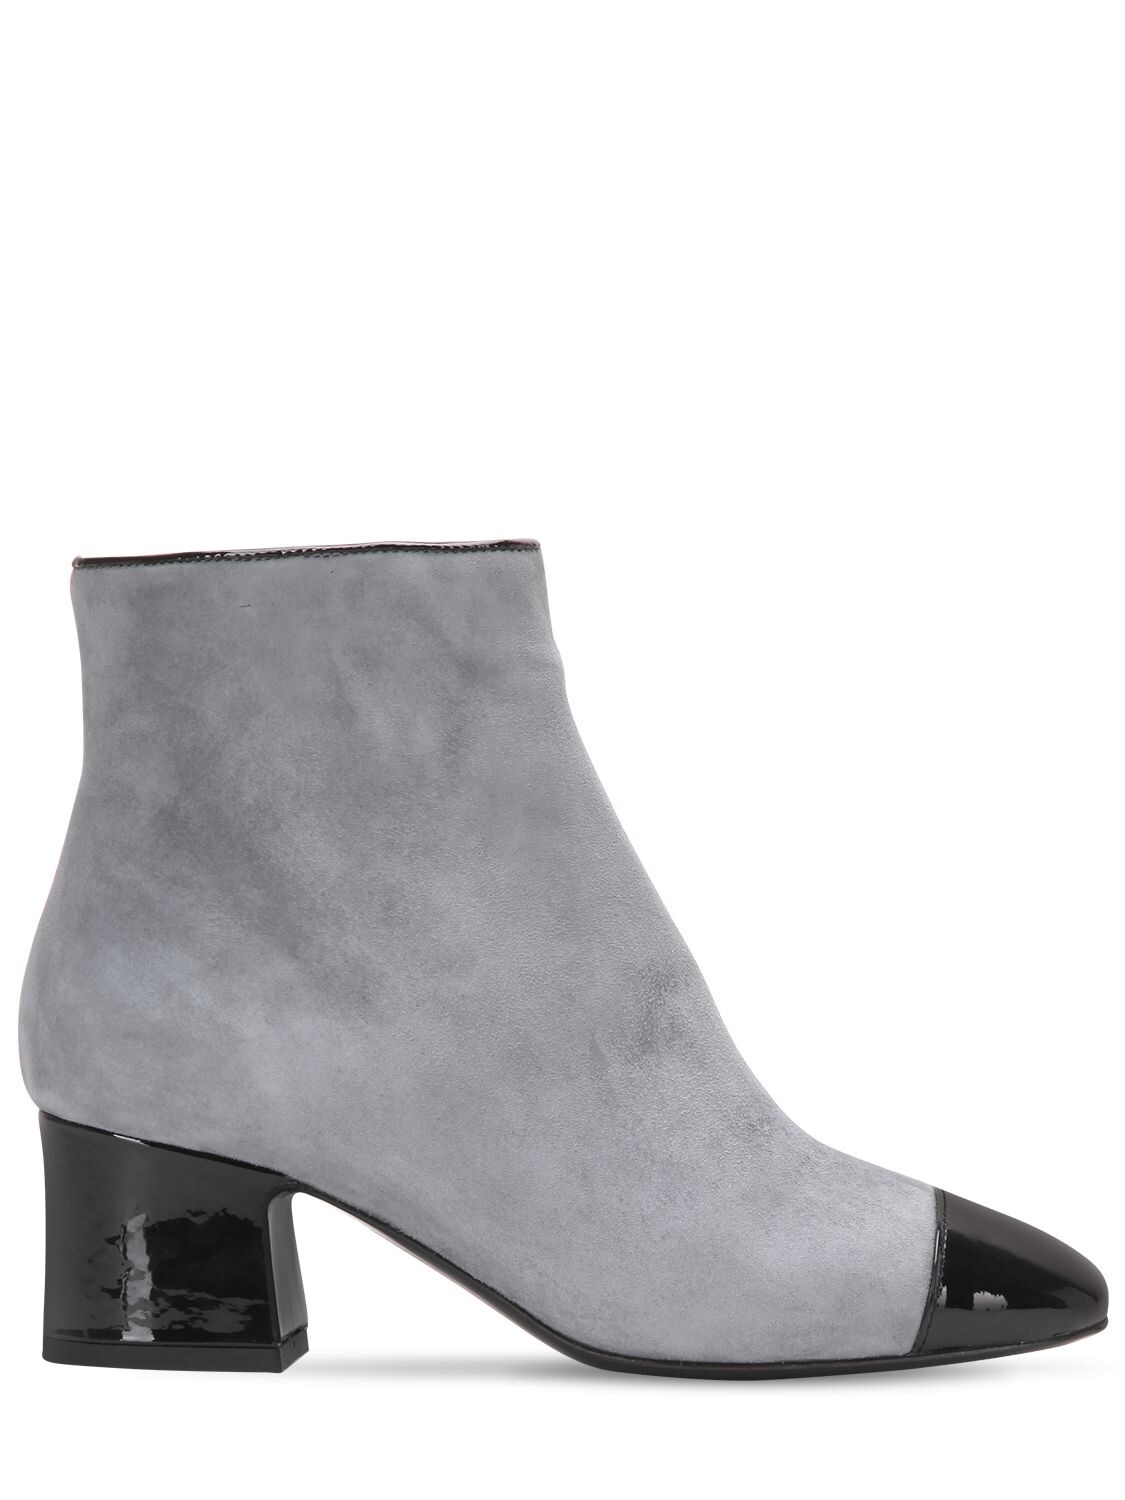 Aand 60mm Suede & Patent Leather Ankle Boots In Grey,black